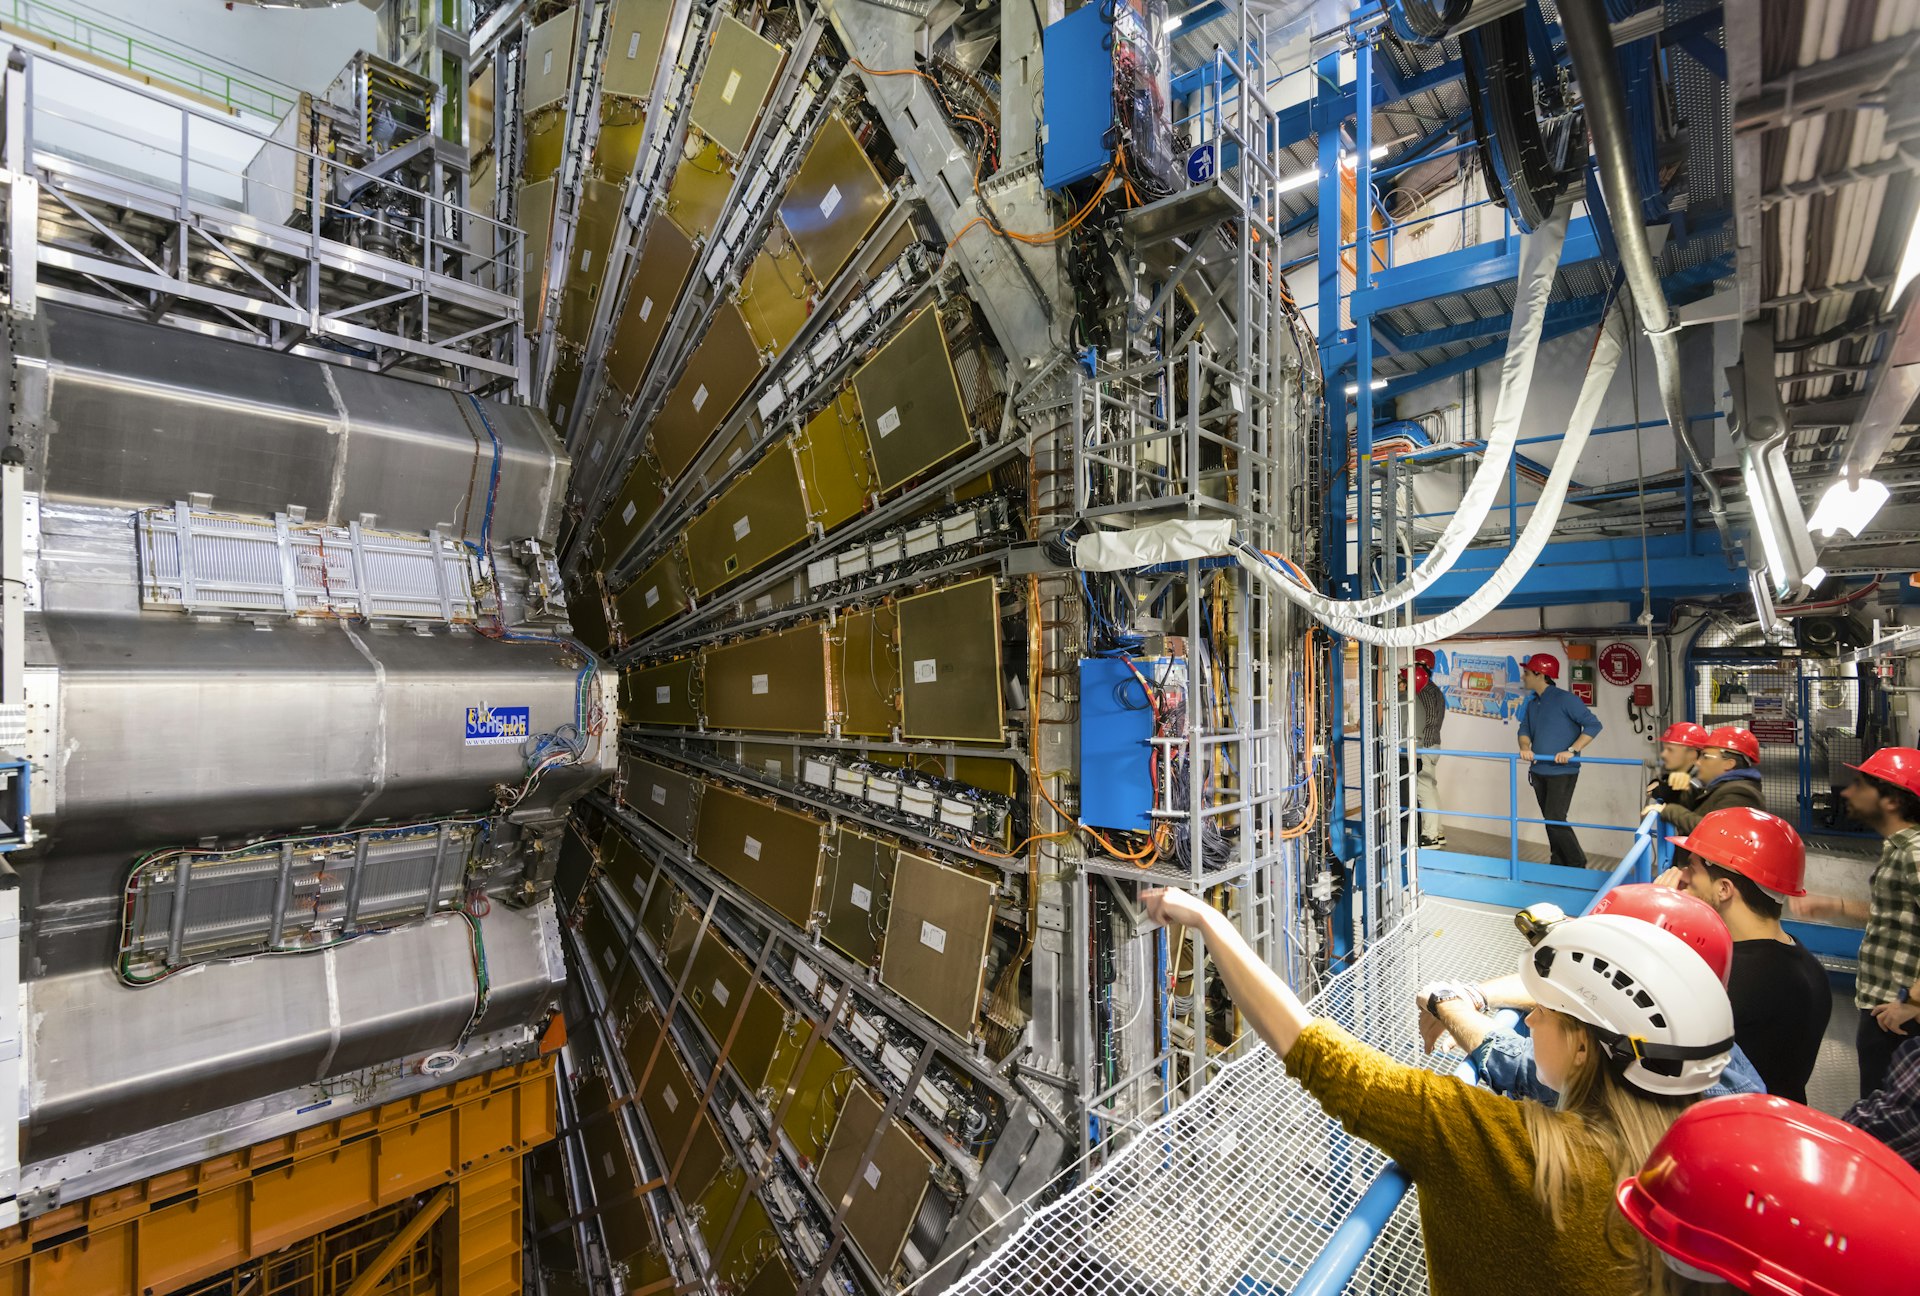 Large Hadron Collider (LHC) nuclear particle accelerator at CERN, Geneva (Switzerland)